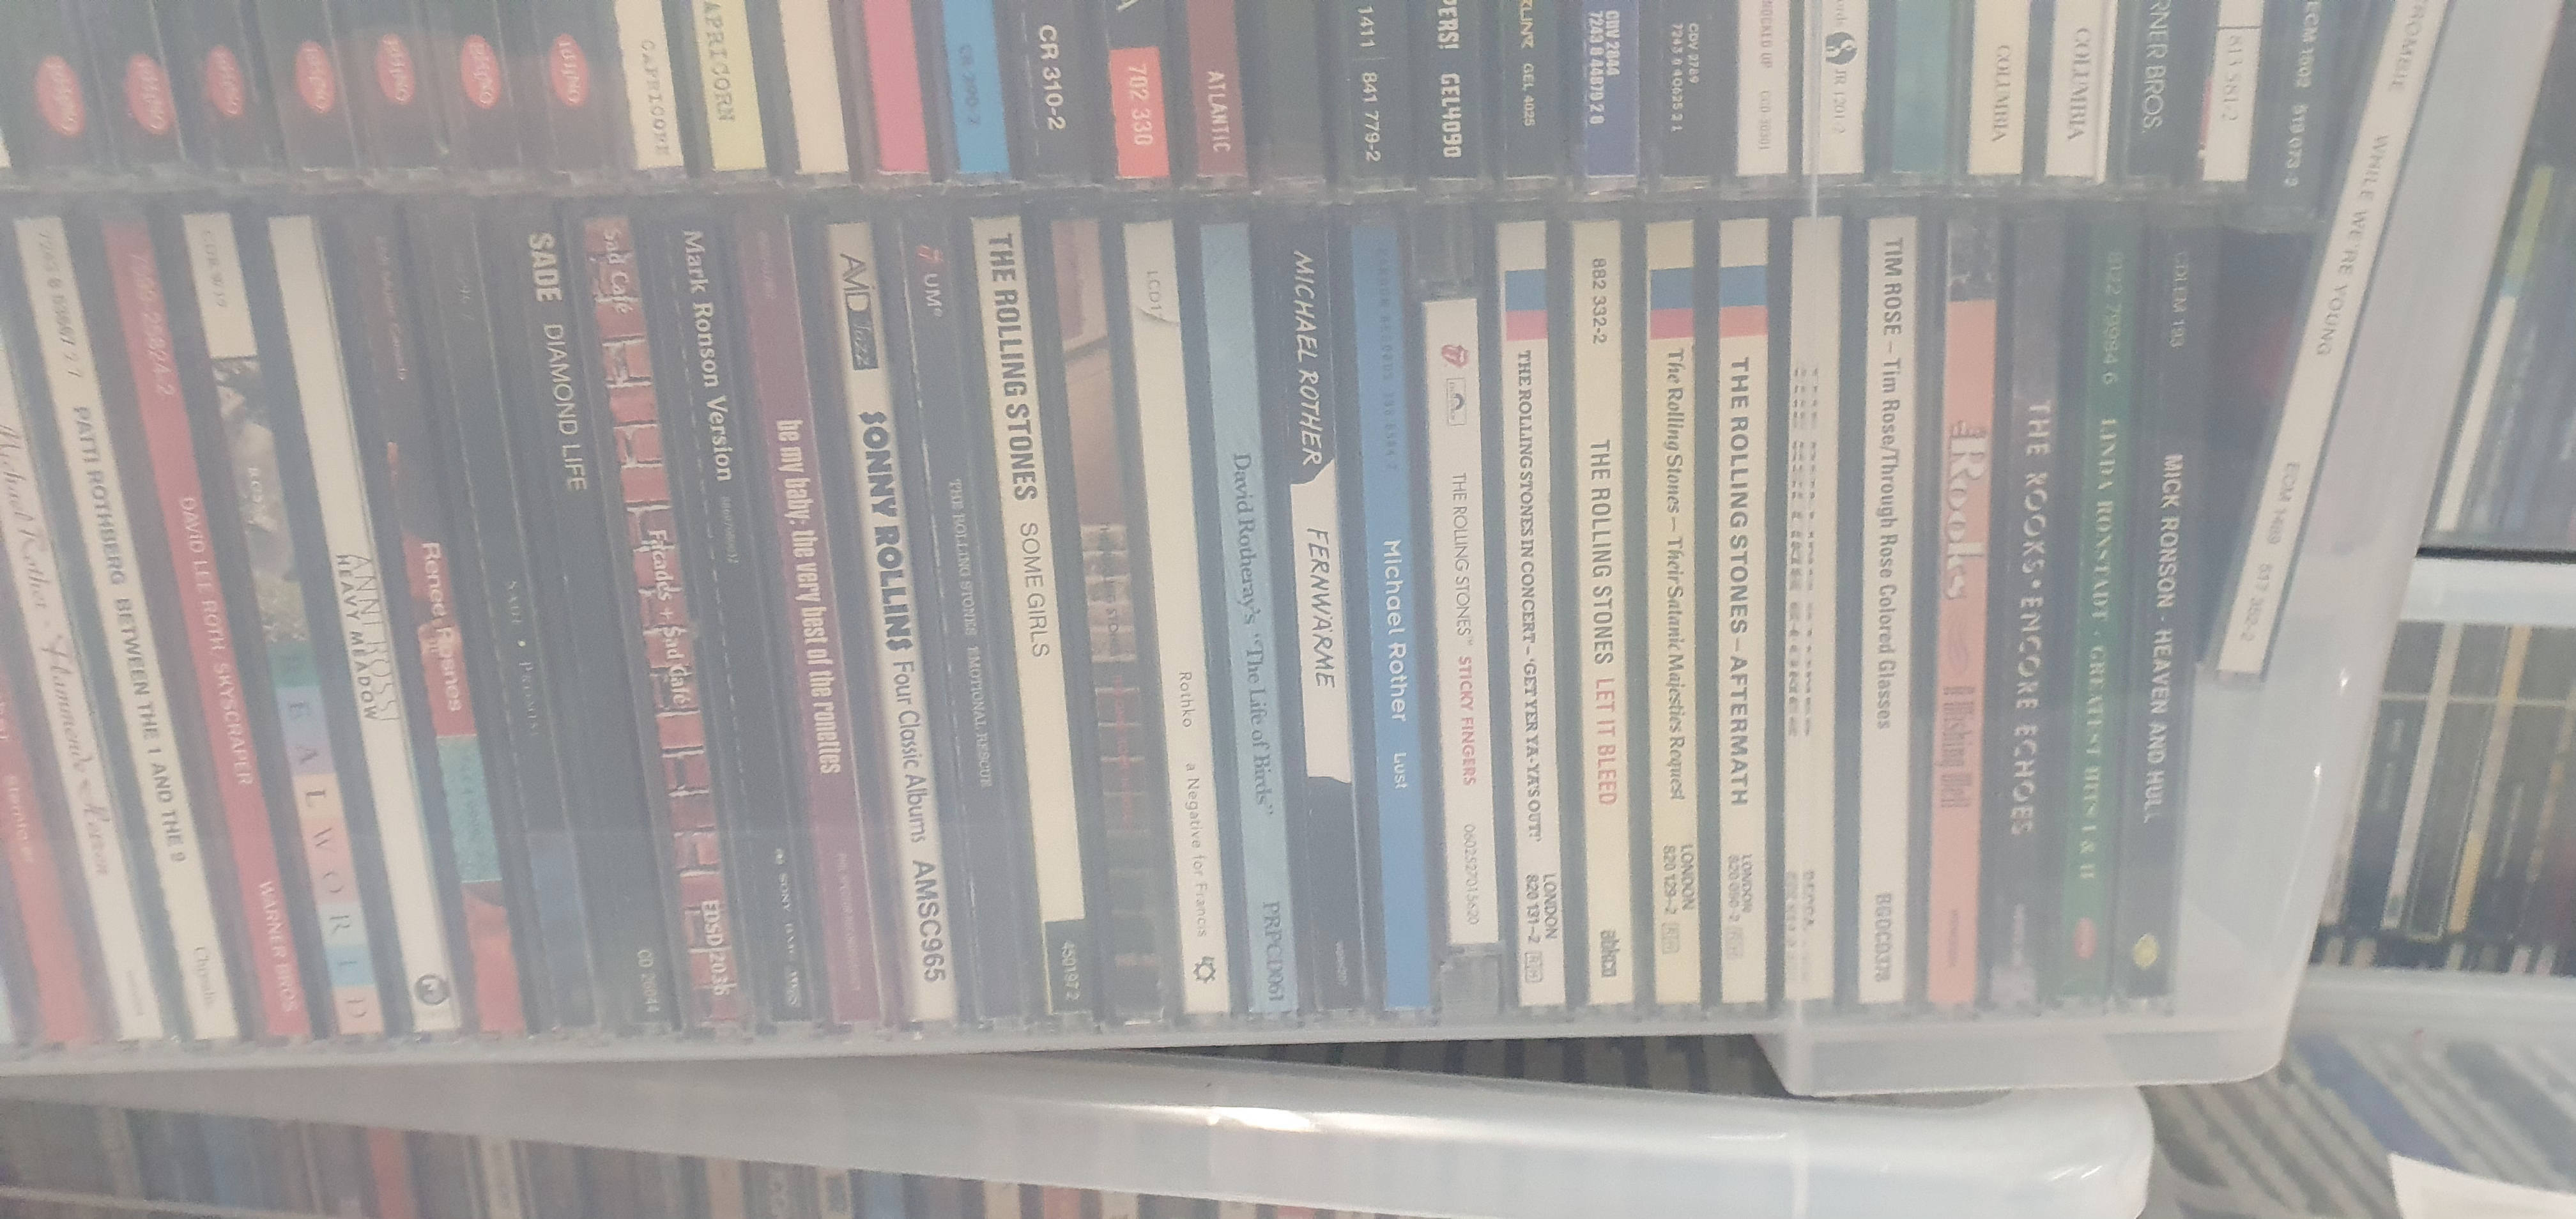 LARGE COLLECTION OF APPROXIMATELY 200 MUSIC CD'S - Image 8 of 9